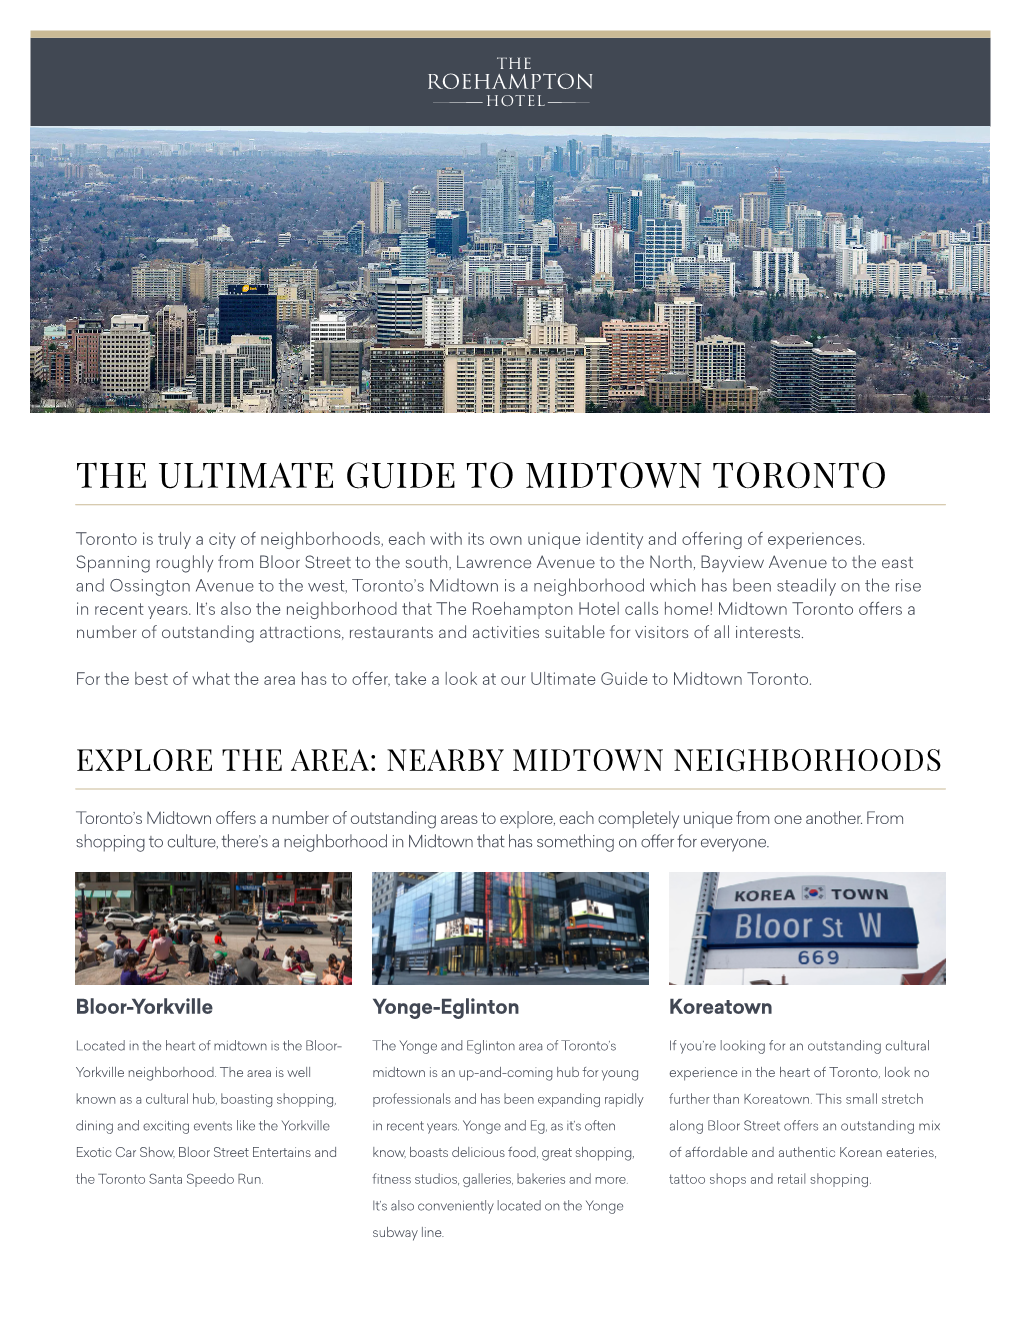 The Ultimate Guide to Midtown Toronto